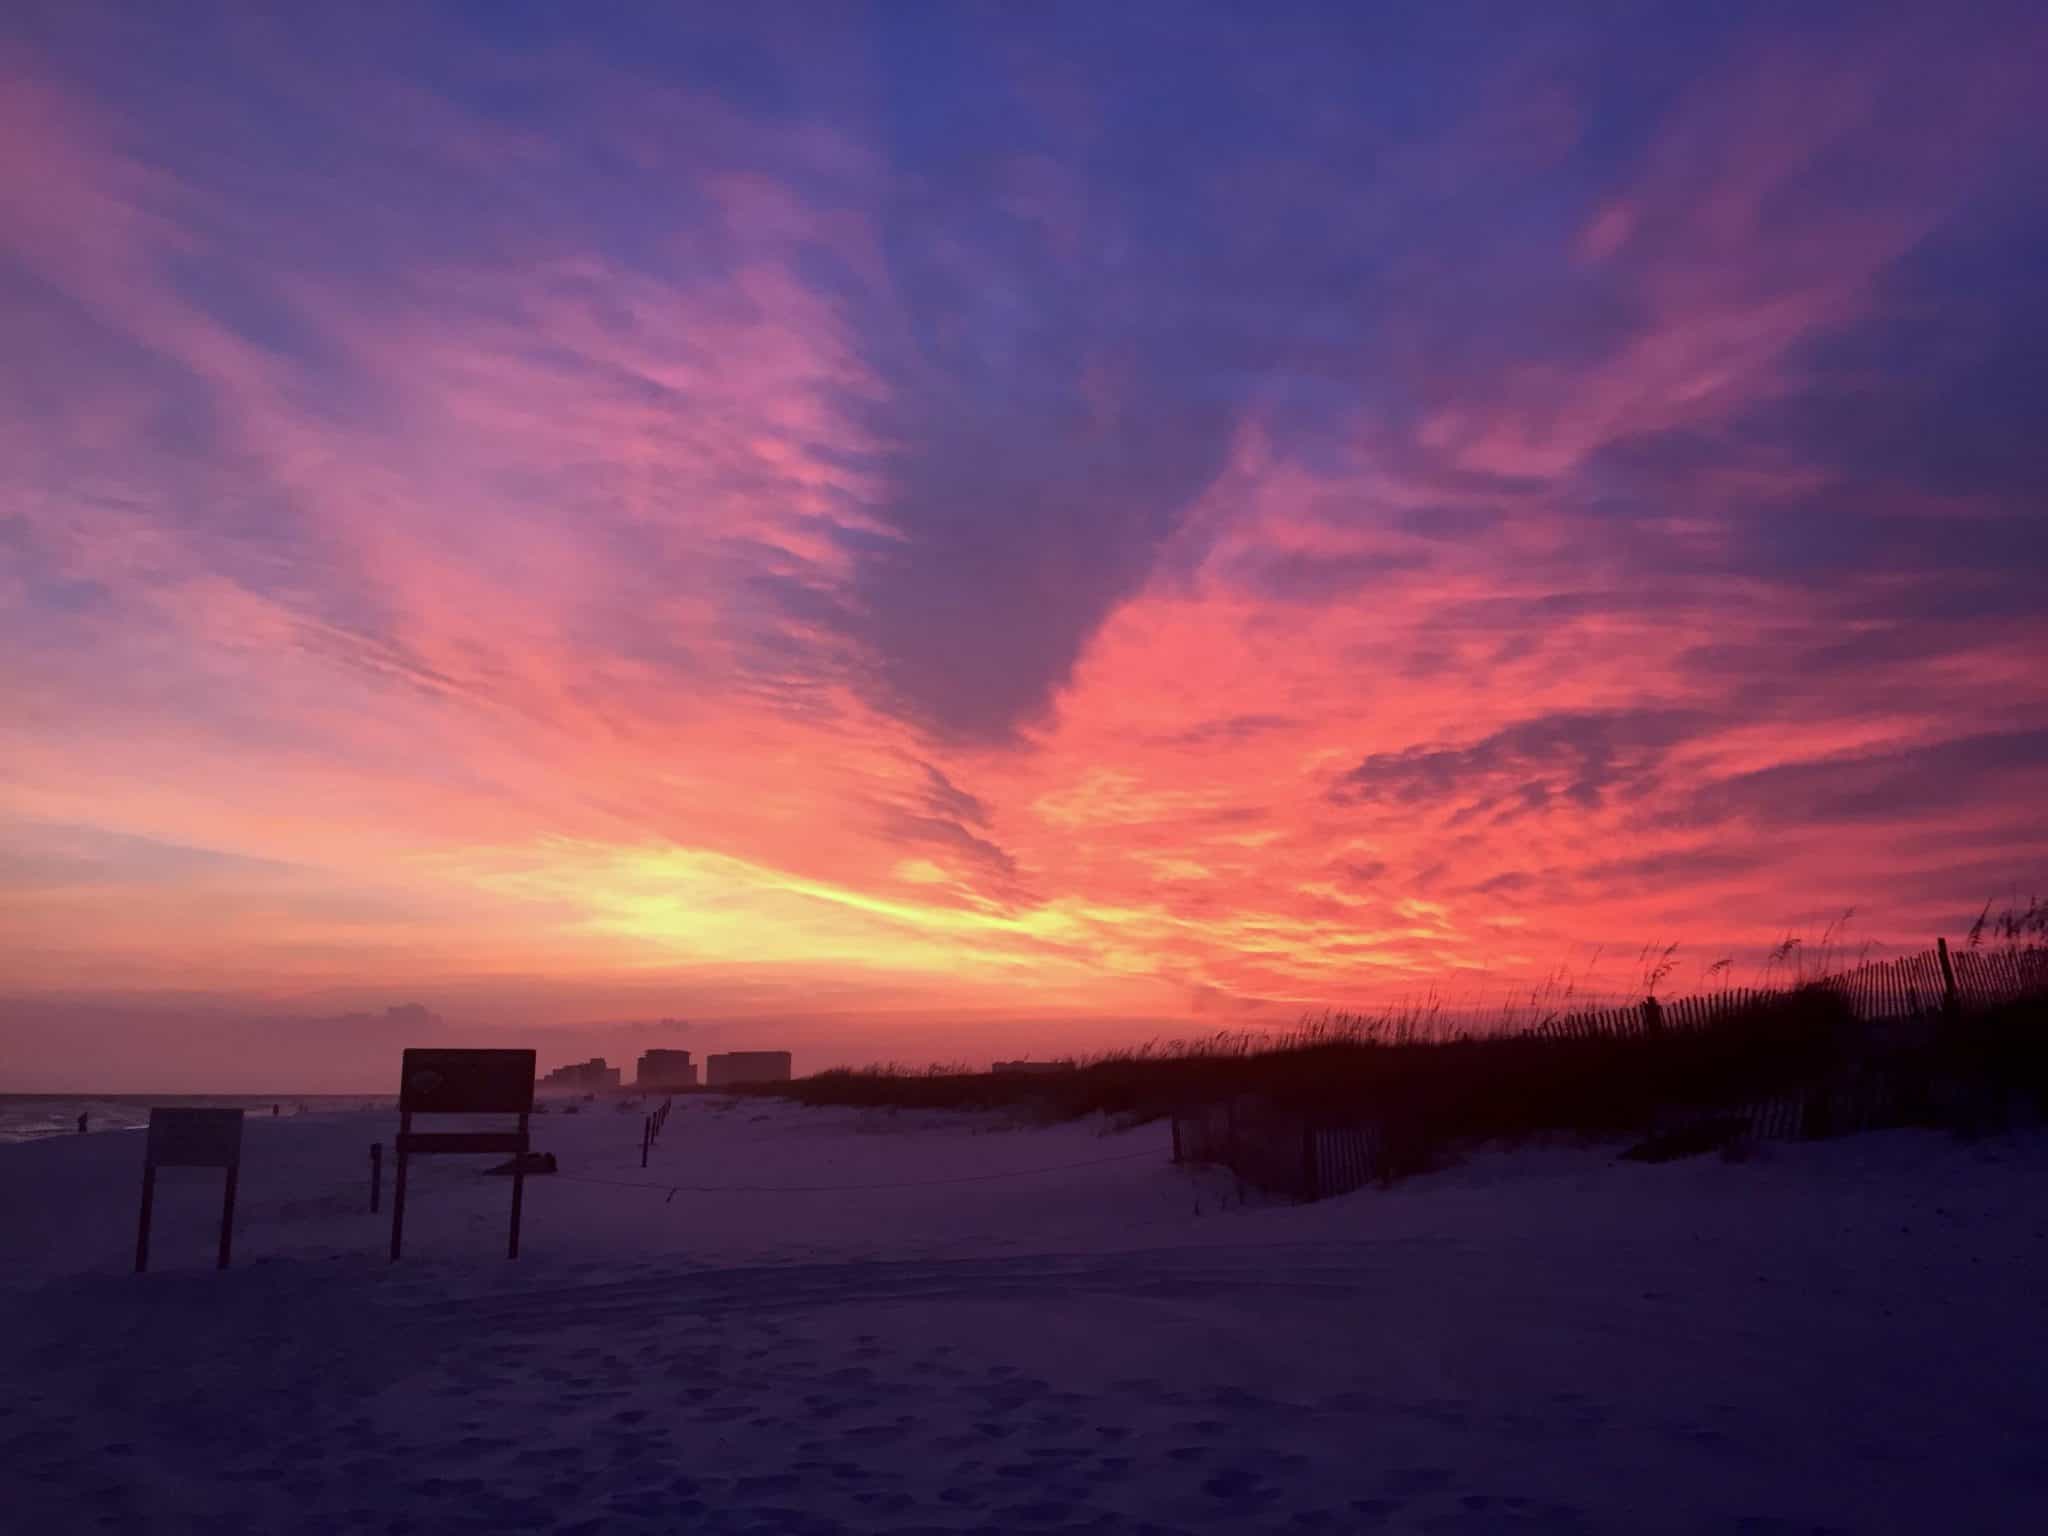 Stunning Destin Florida Beach Picture That'll Make You Want To Visit Now